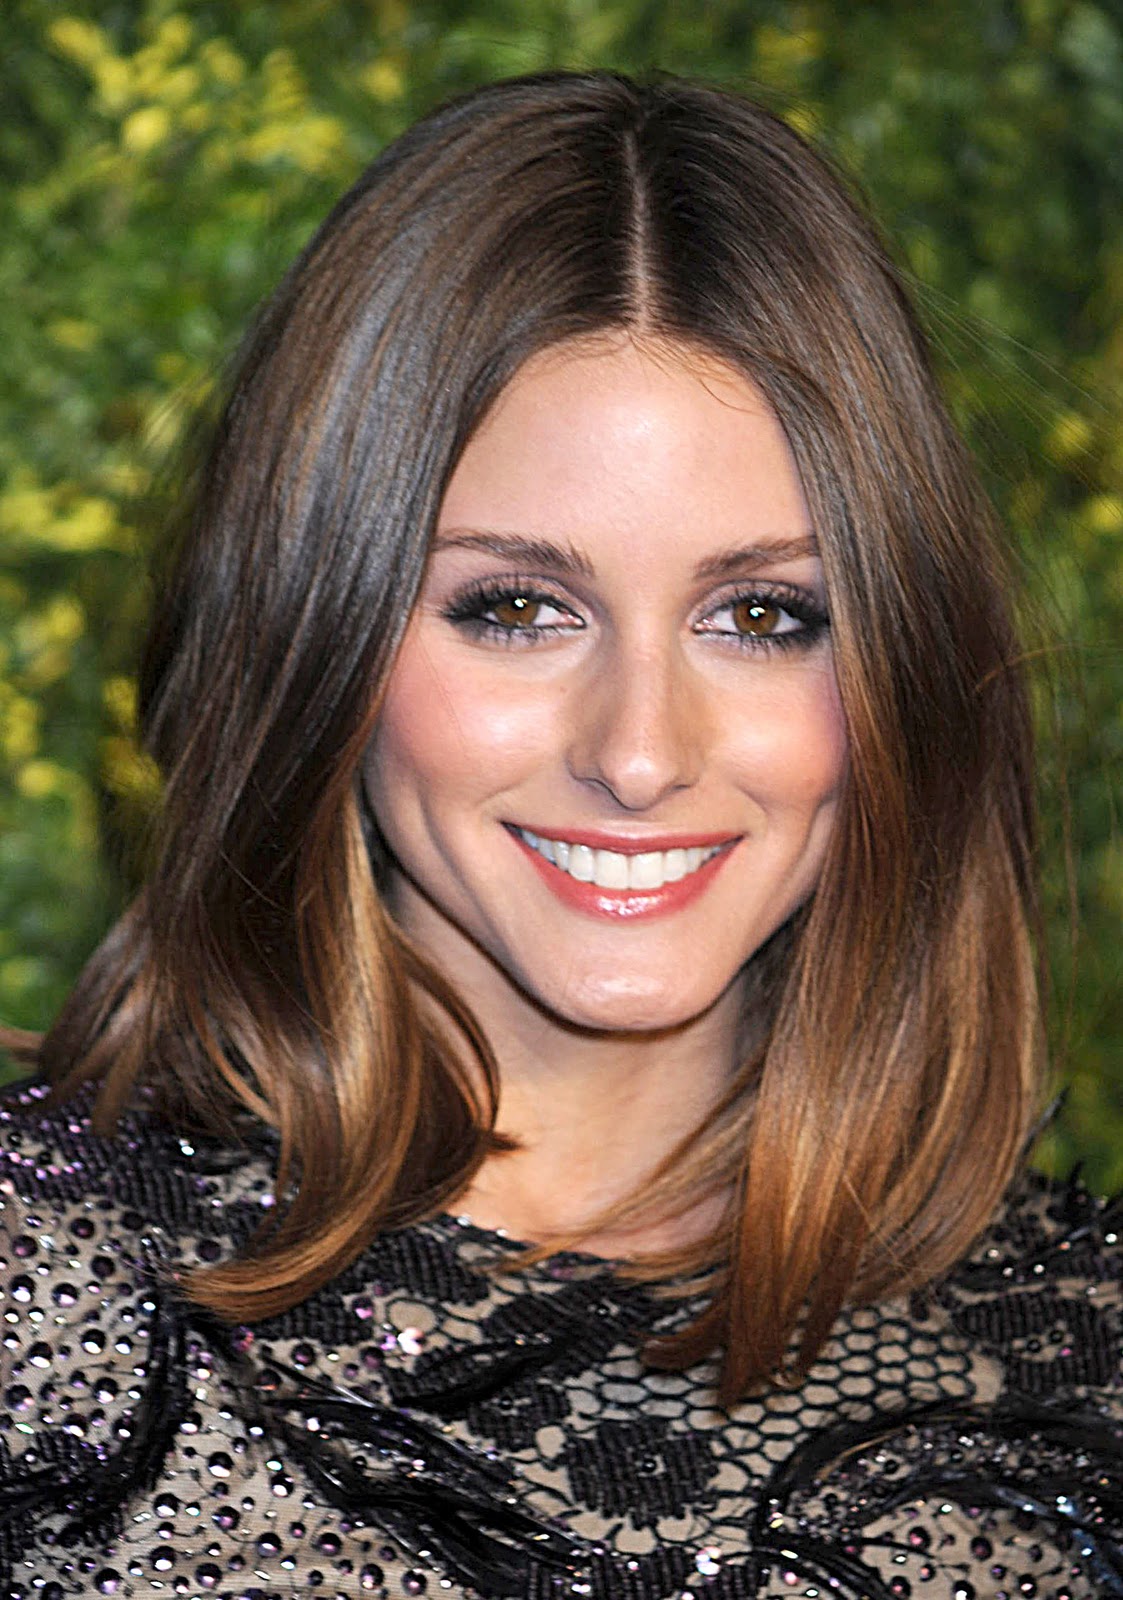 Olivia Palermo , a style icon, is a synonym for Lob hairstyle. She ...